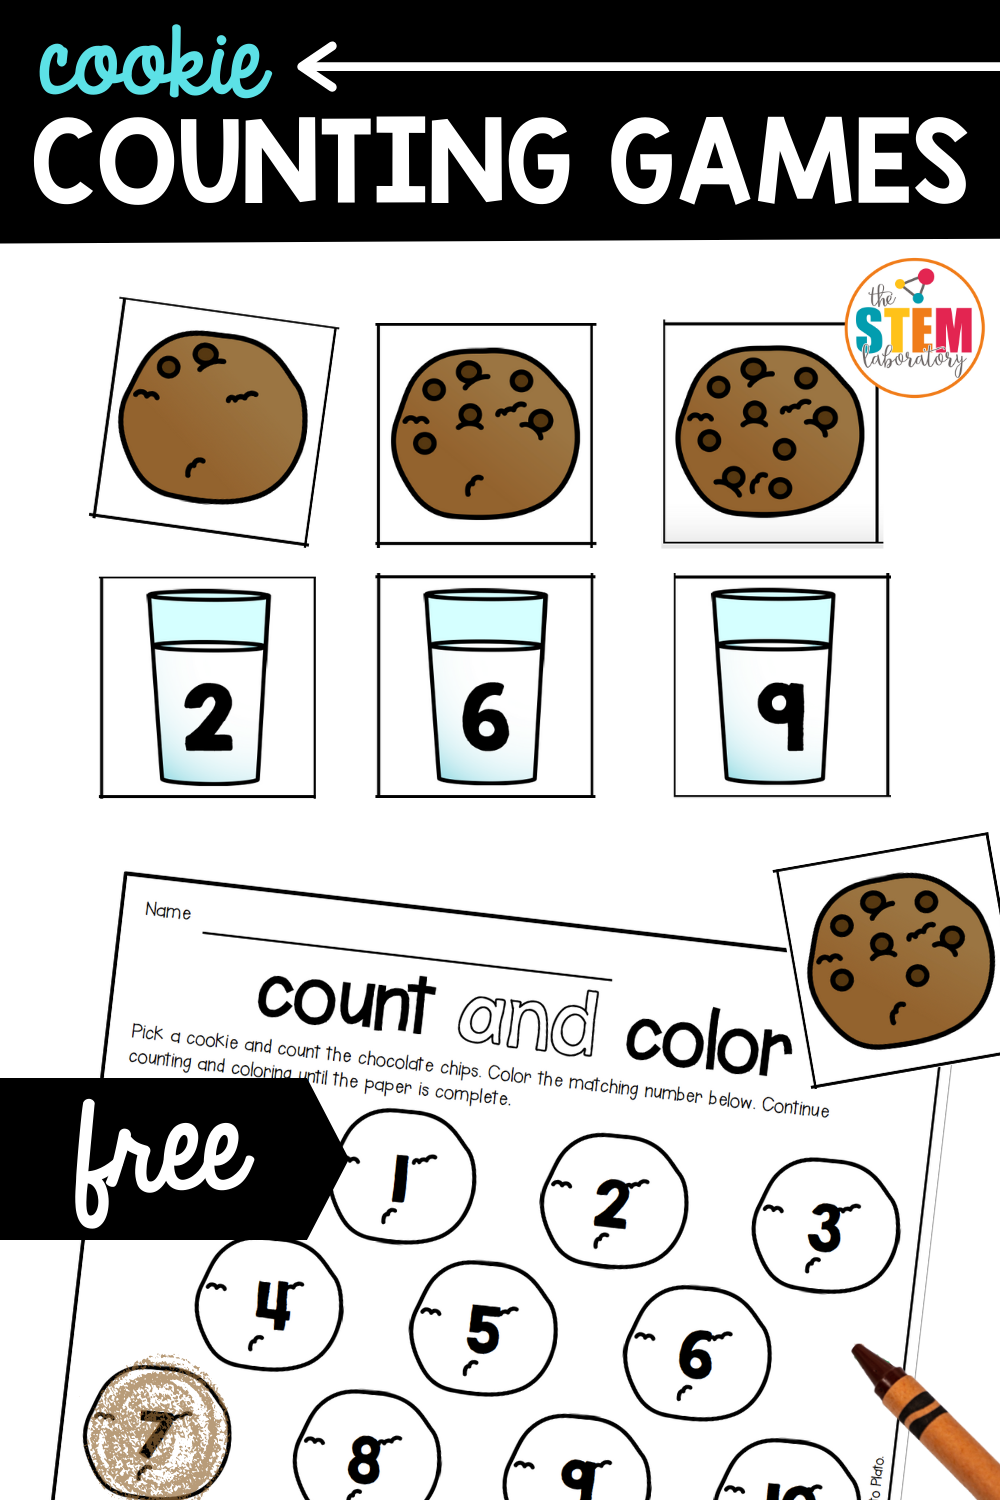 Cookie Counting Games